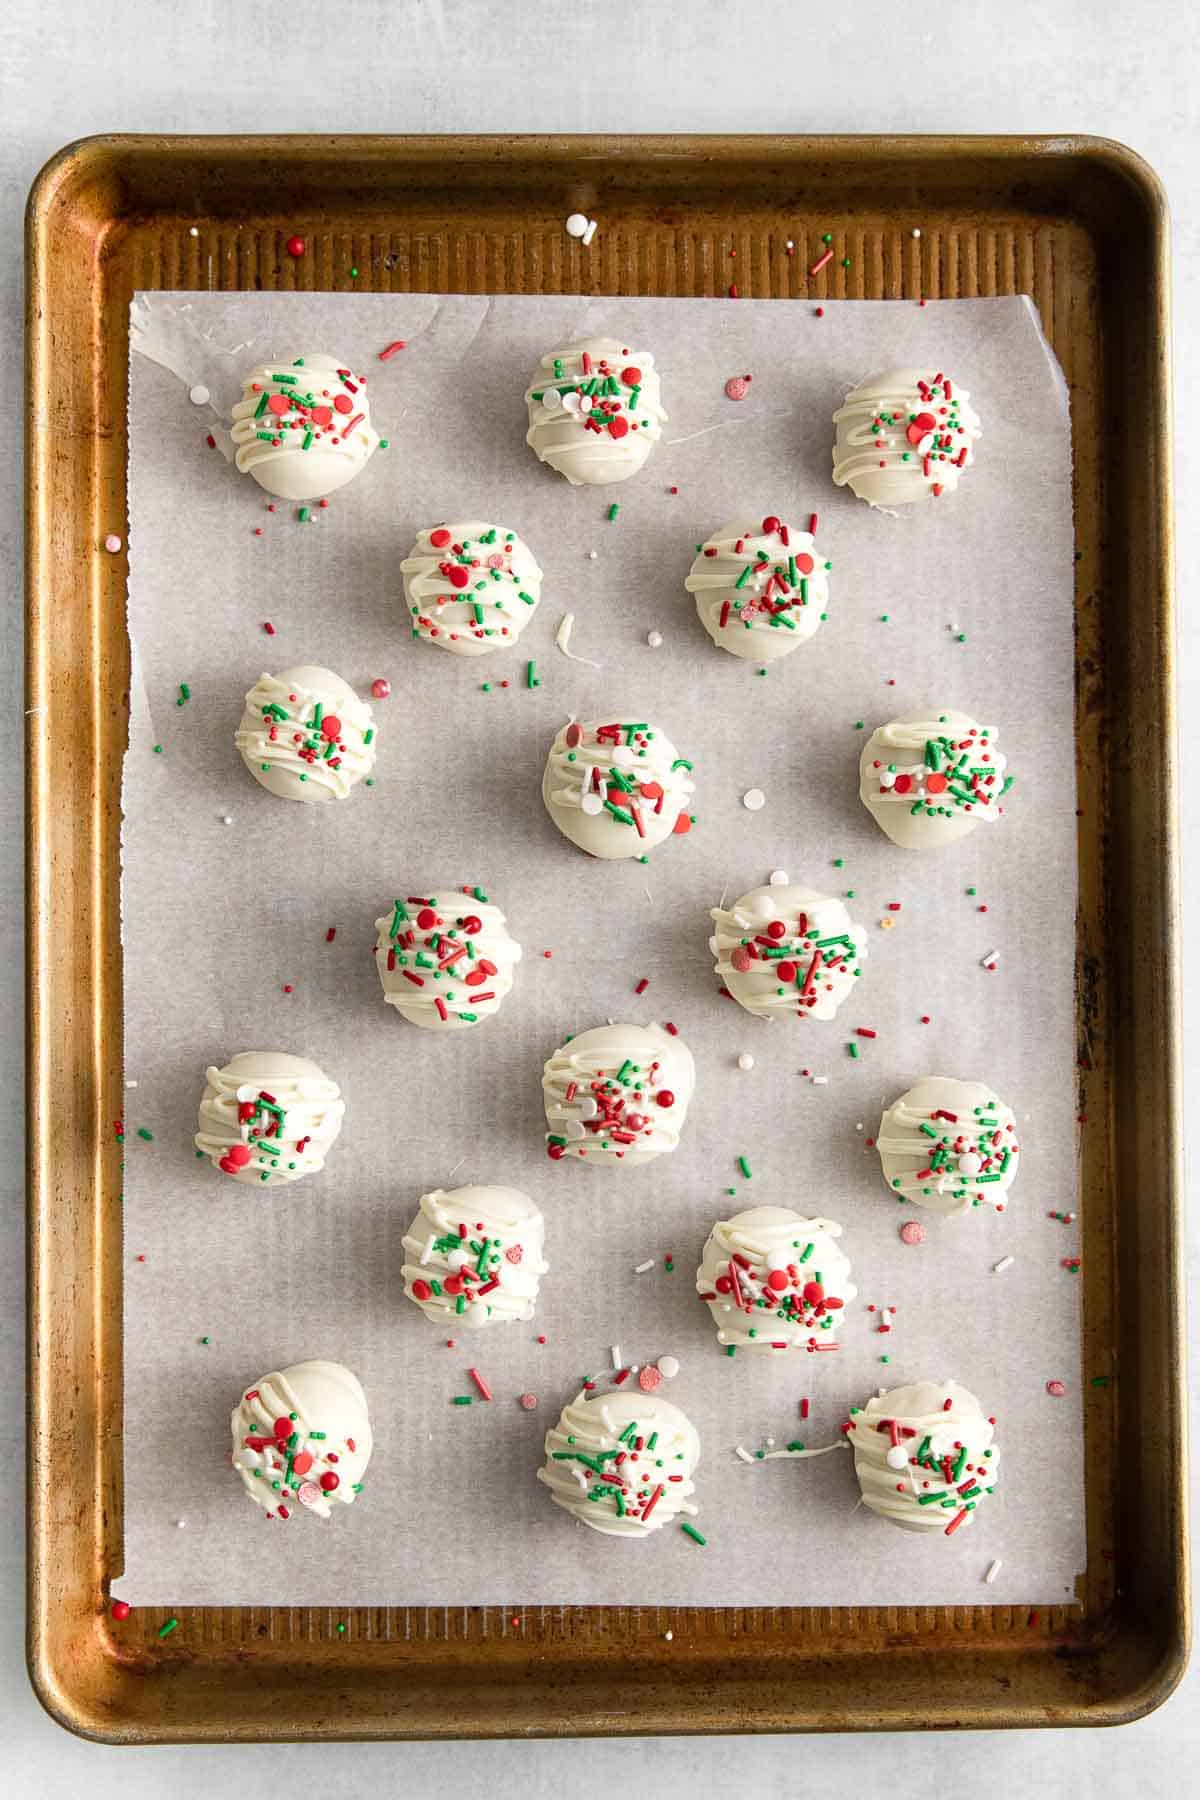 baking sheet with peanut butter snowballs decorated with red, green and white sprinkles.